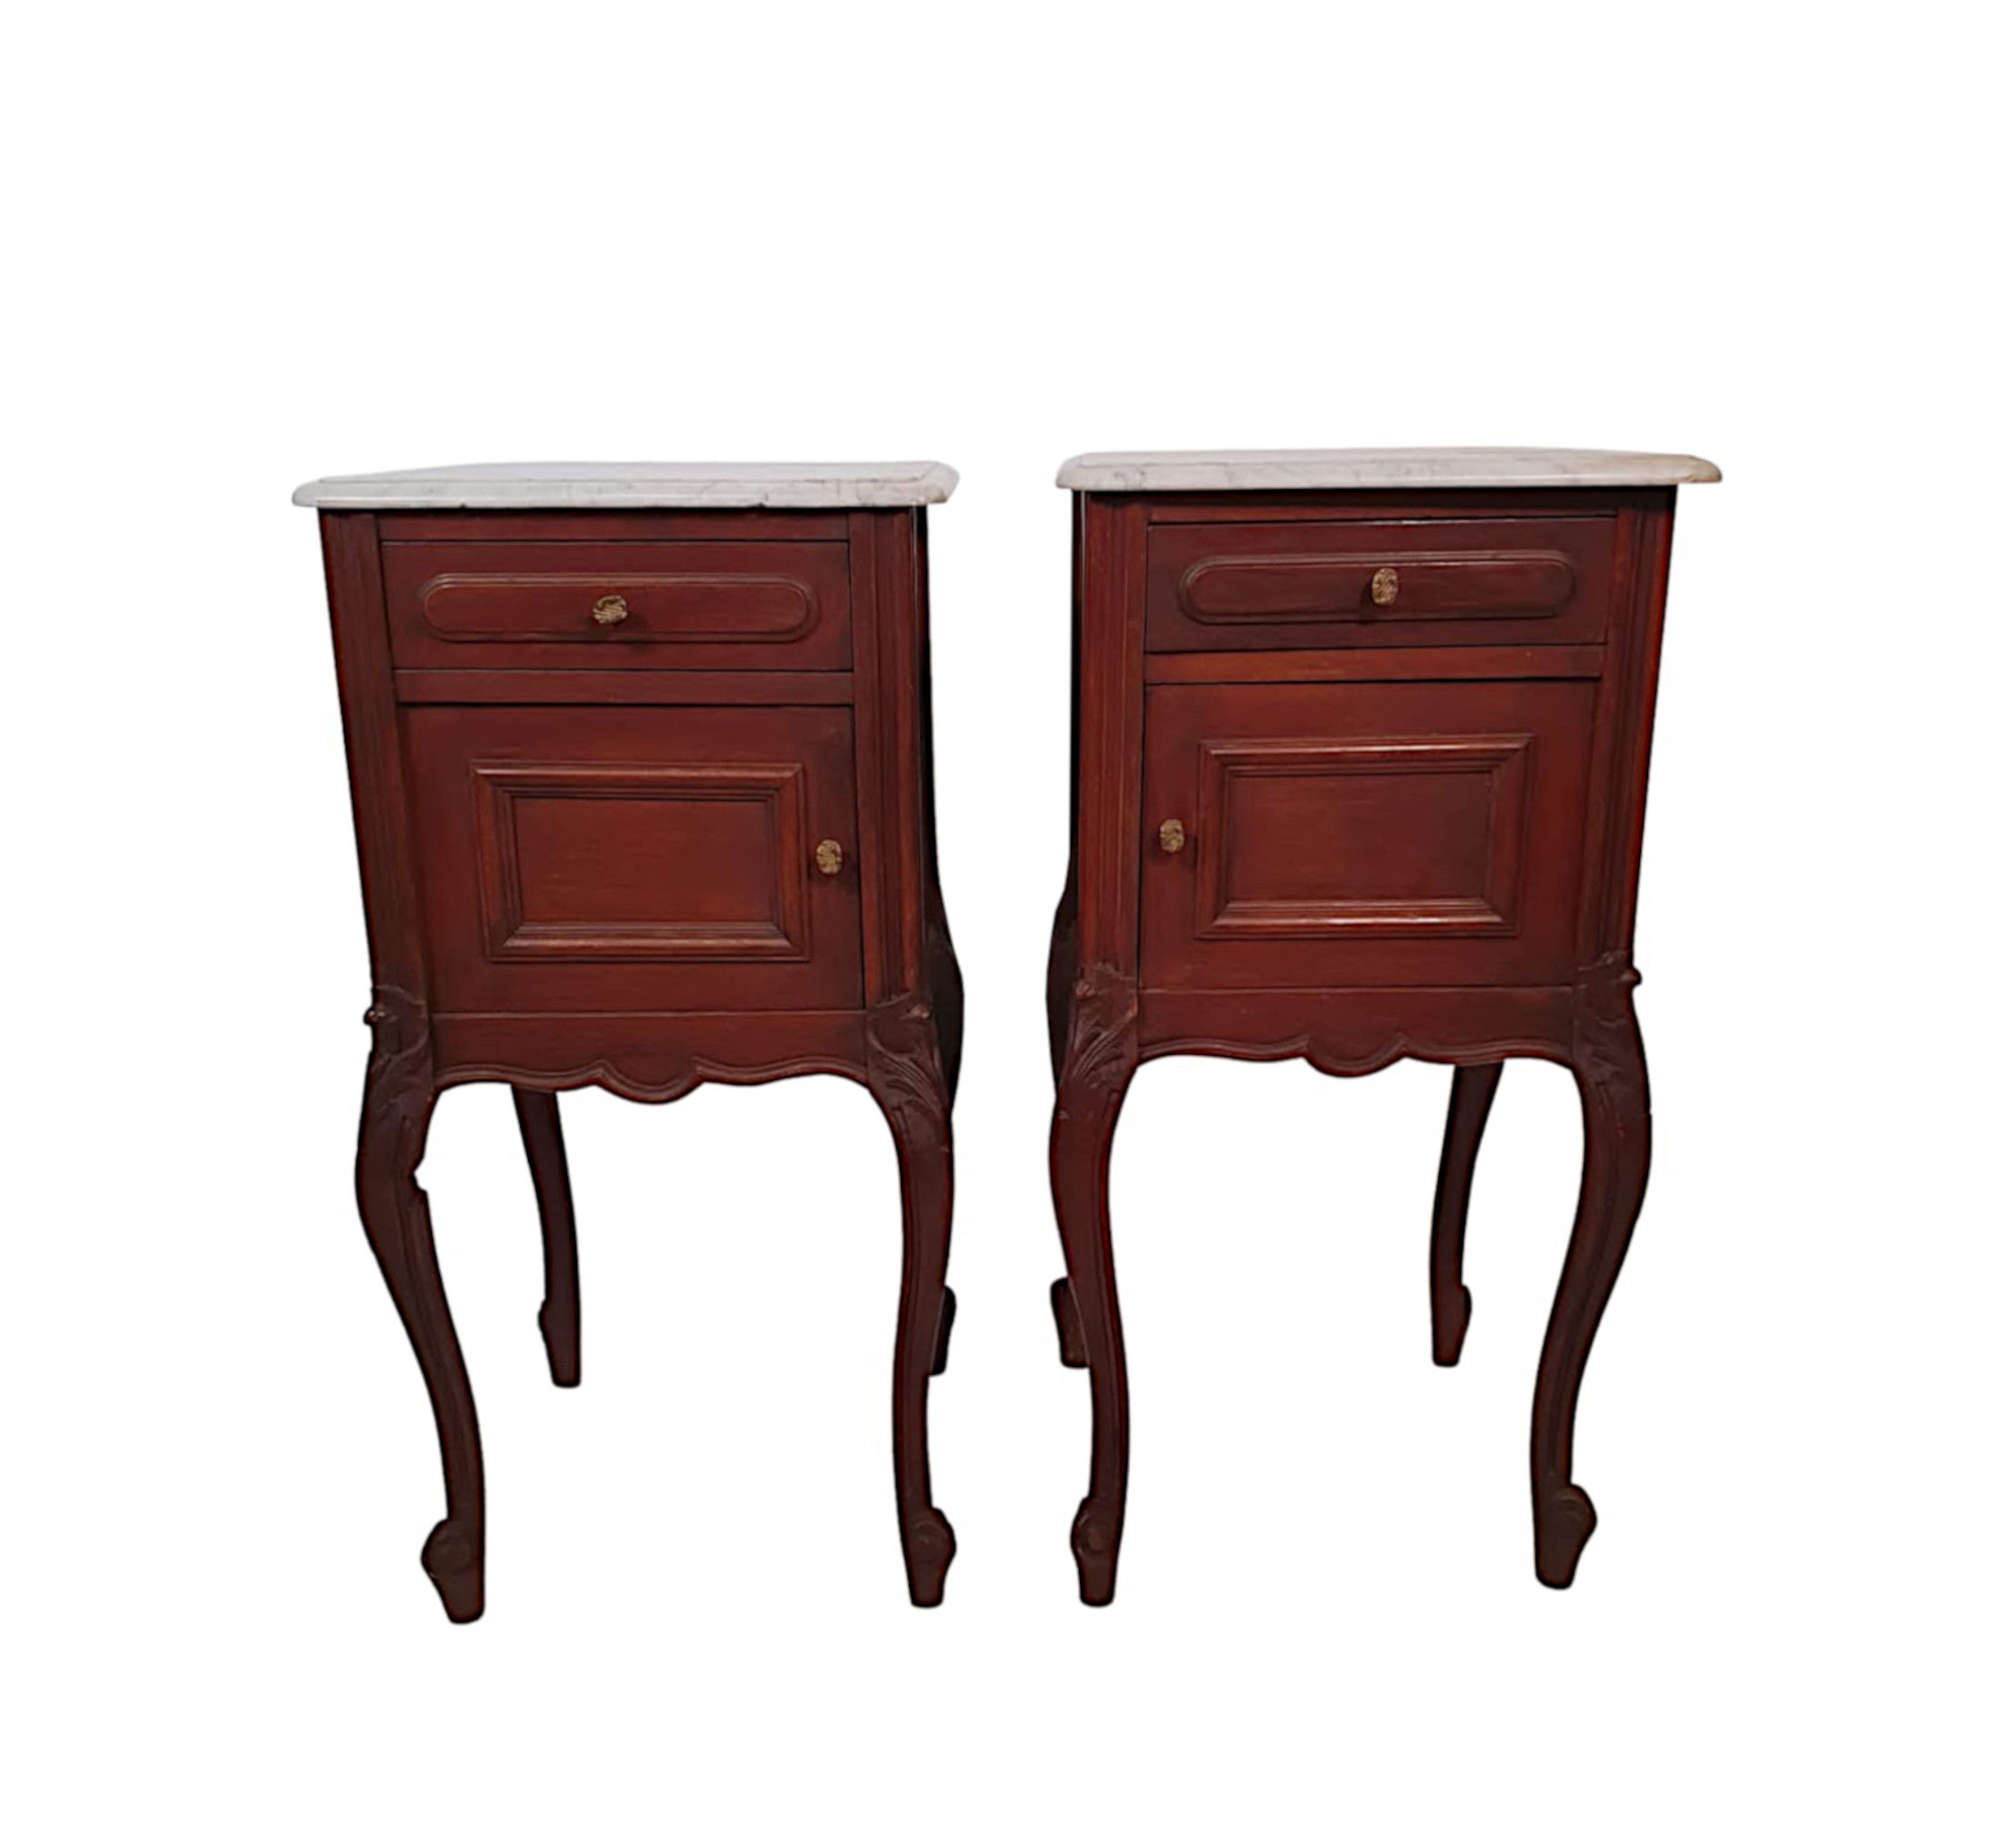 A Stunning Pair Of 19th Century French Marble Top Bedside Lockers